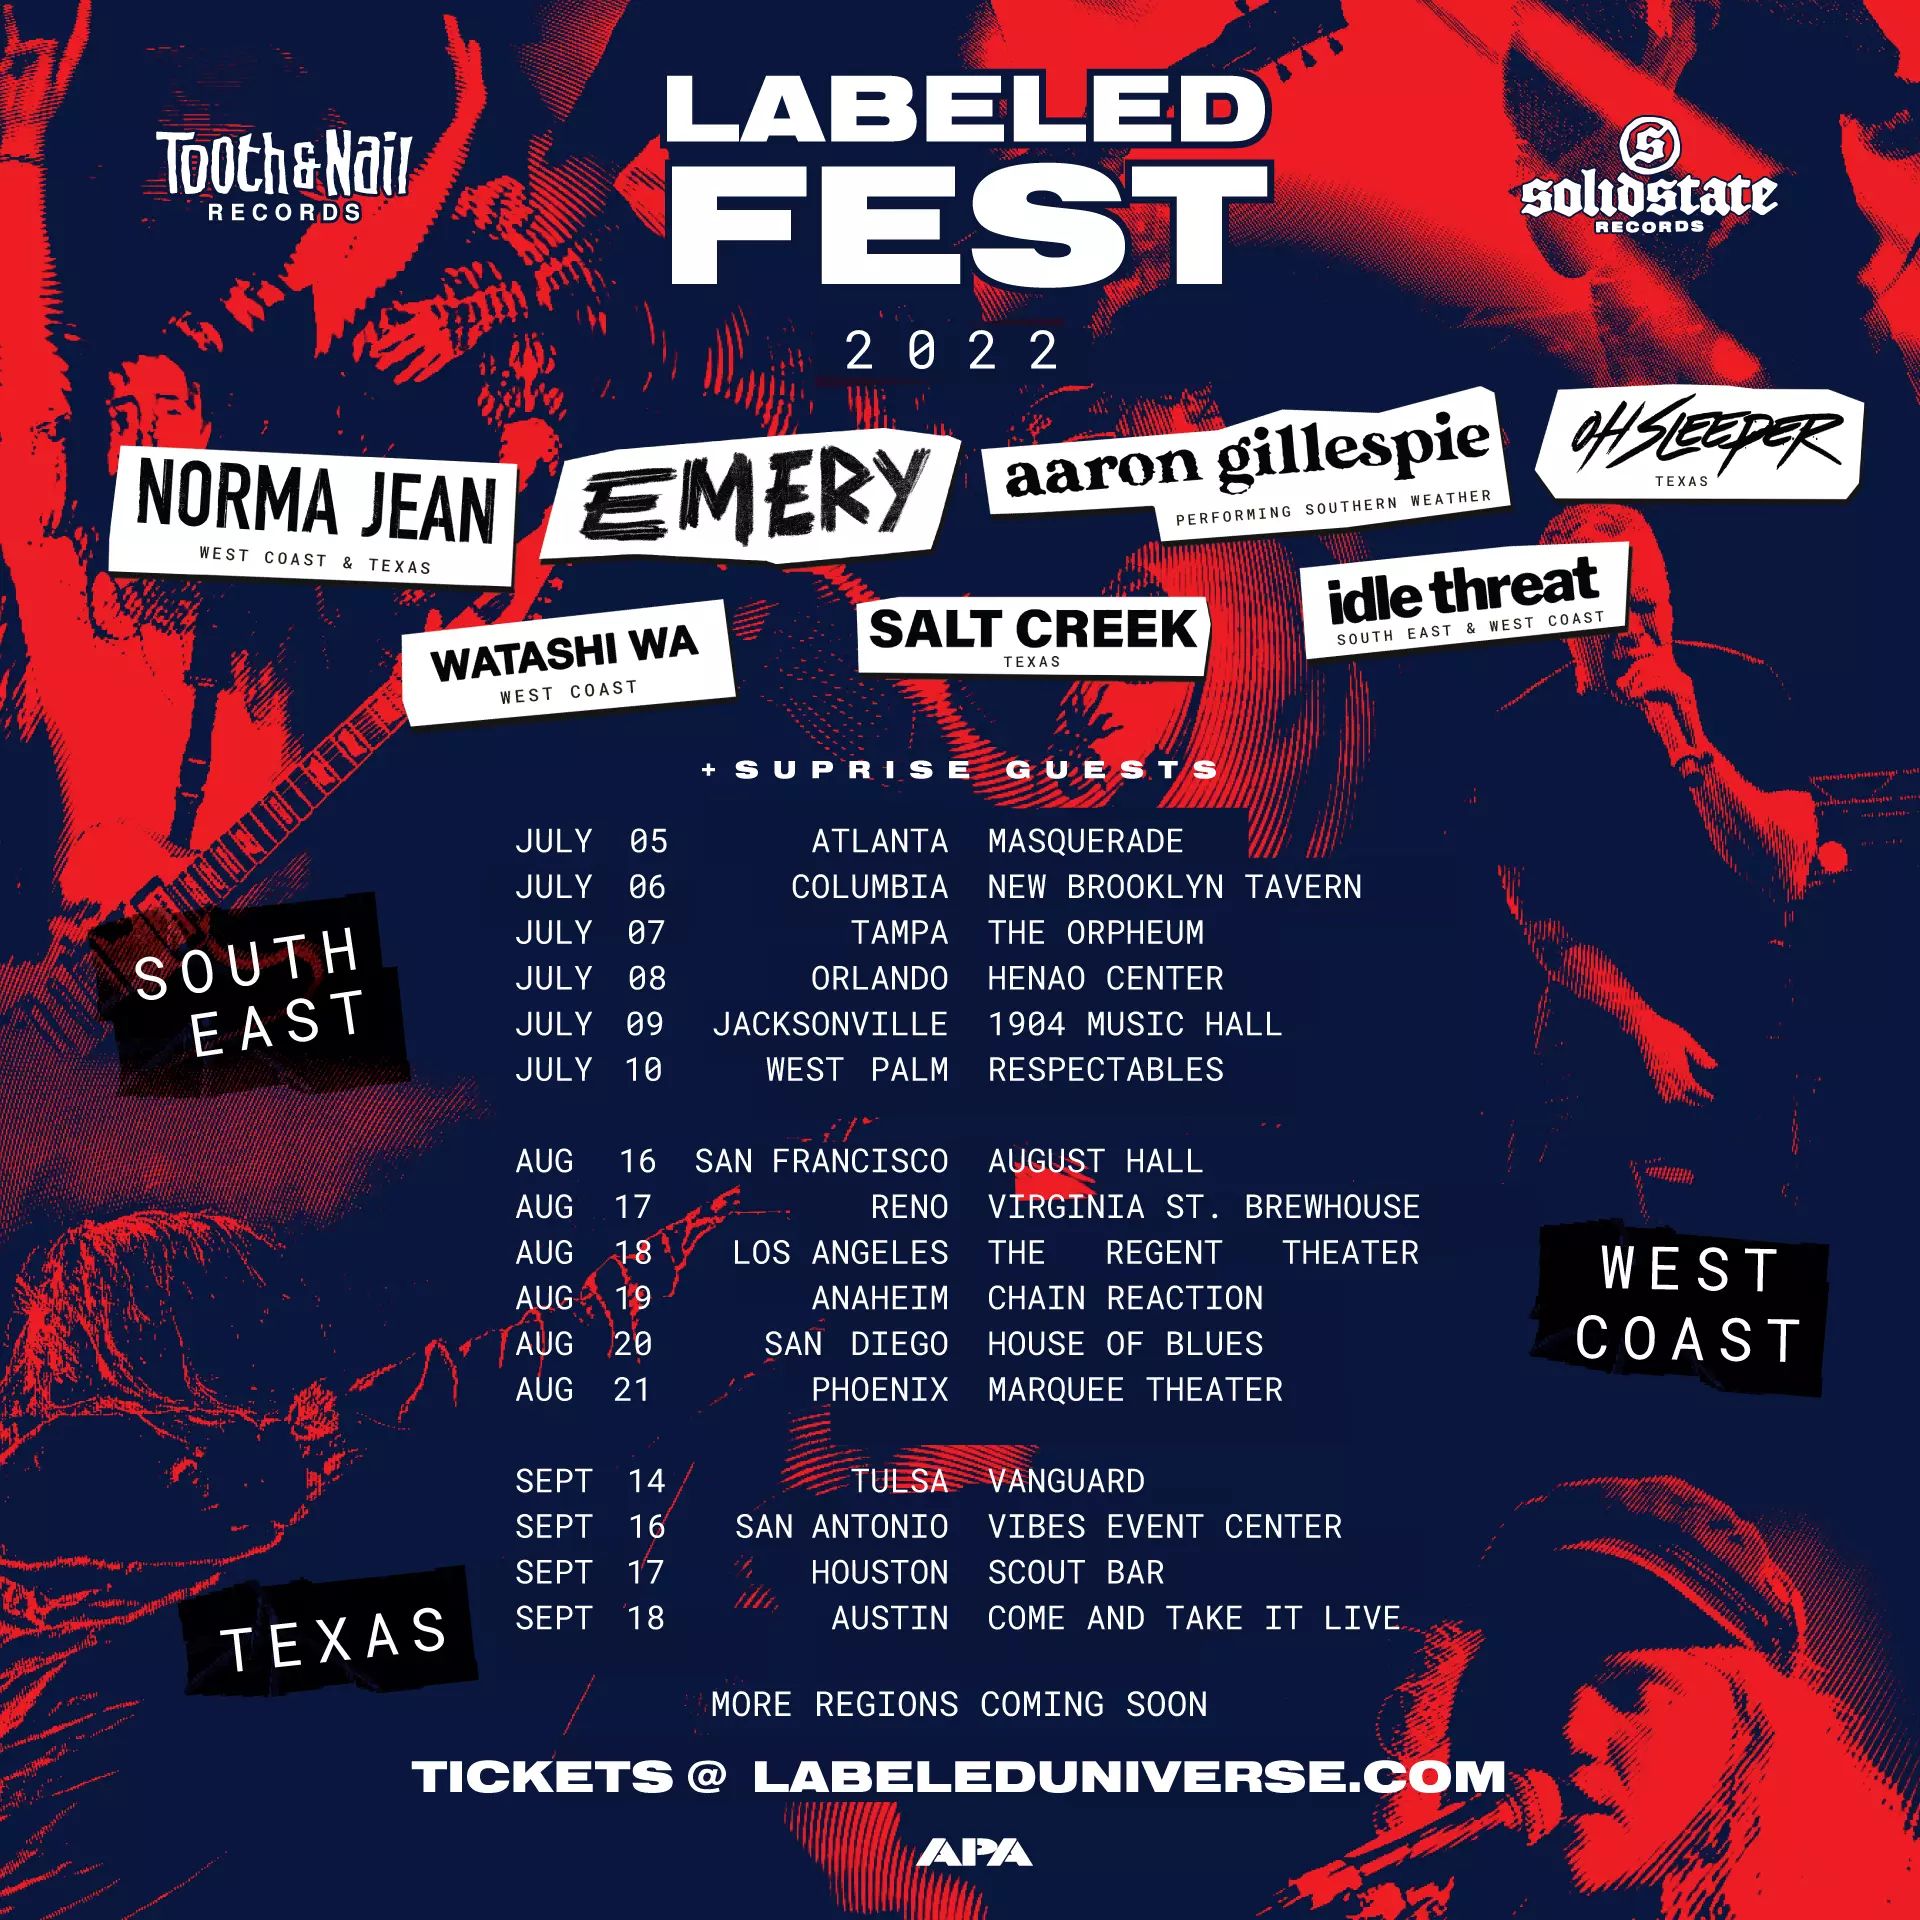 Norma Jean, Emery + Aaron Gillespie Plot 'Labeled Fest' 2022 Tour